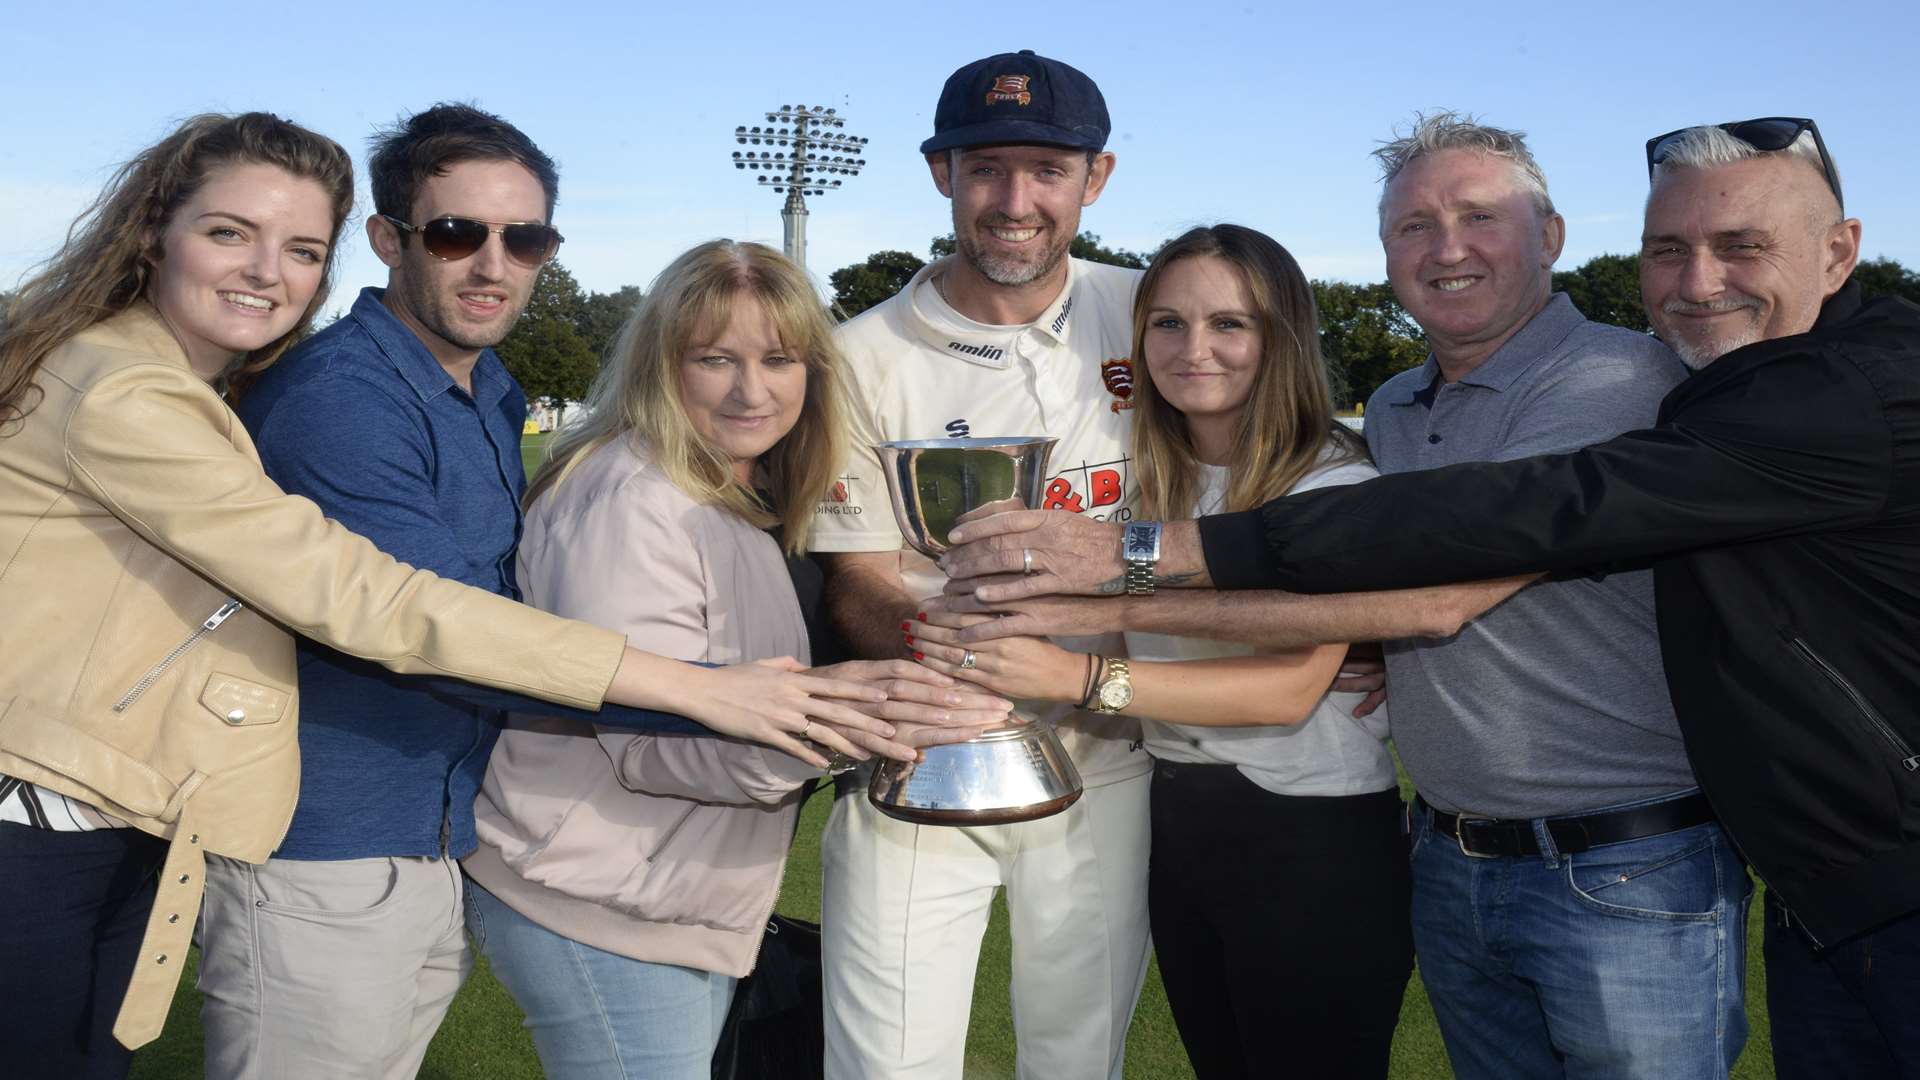 David Masters, centre, celebrates winning the Division 2 title with his family. From left: Sister-in-law Jennifer, brother Daniel, mother Tracey, wife Jenna, father Kevin and uncle Andy Picture: Chris Davey